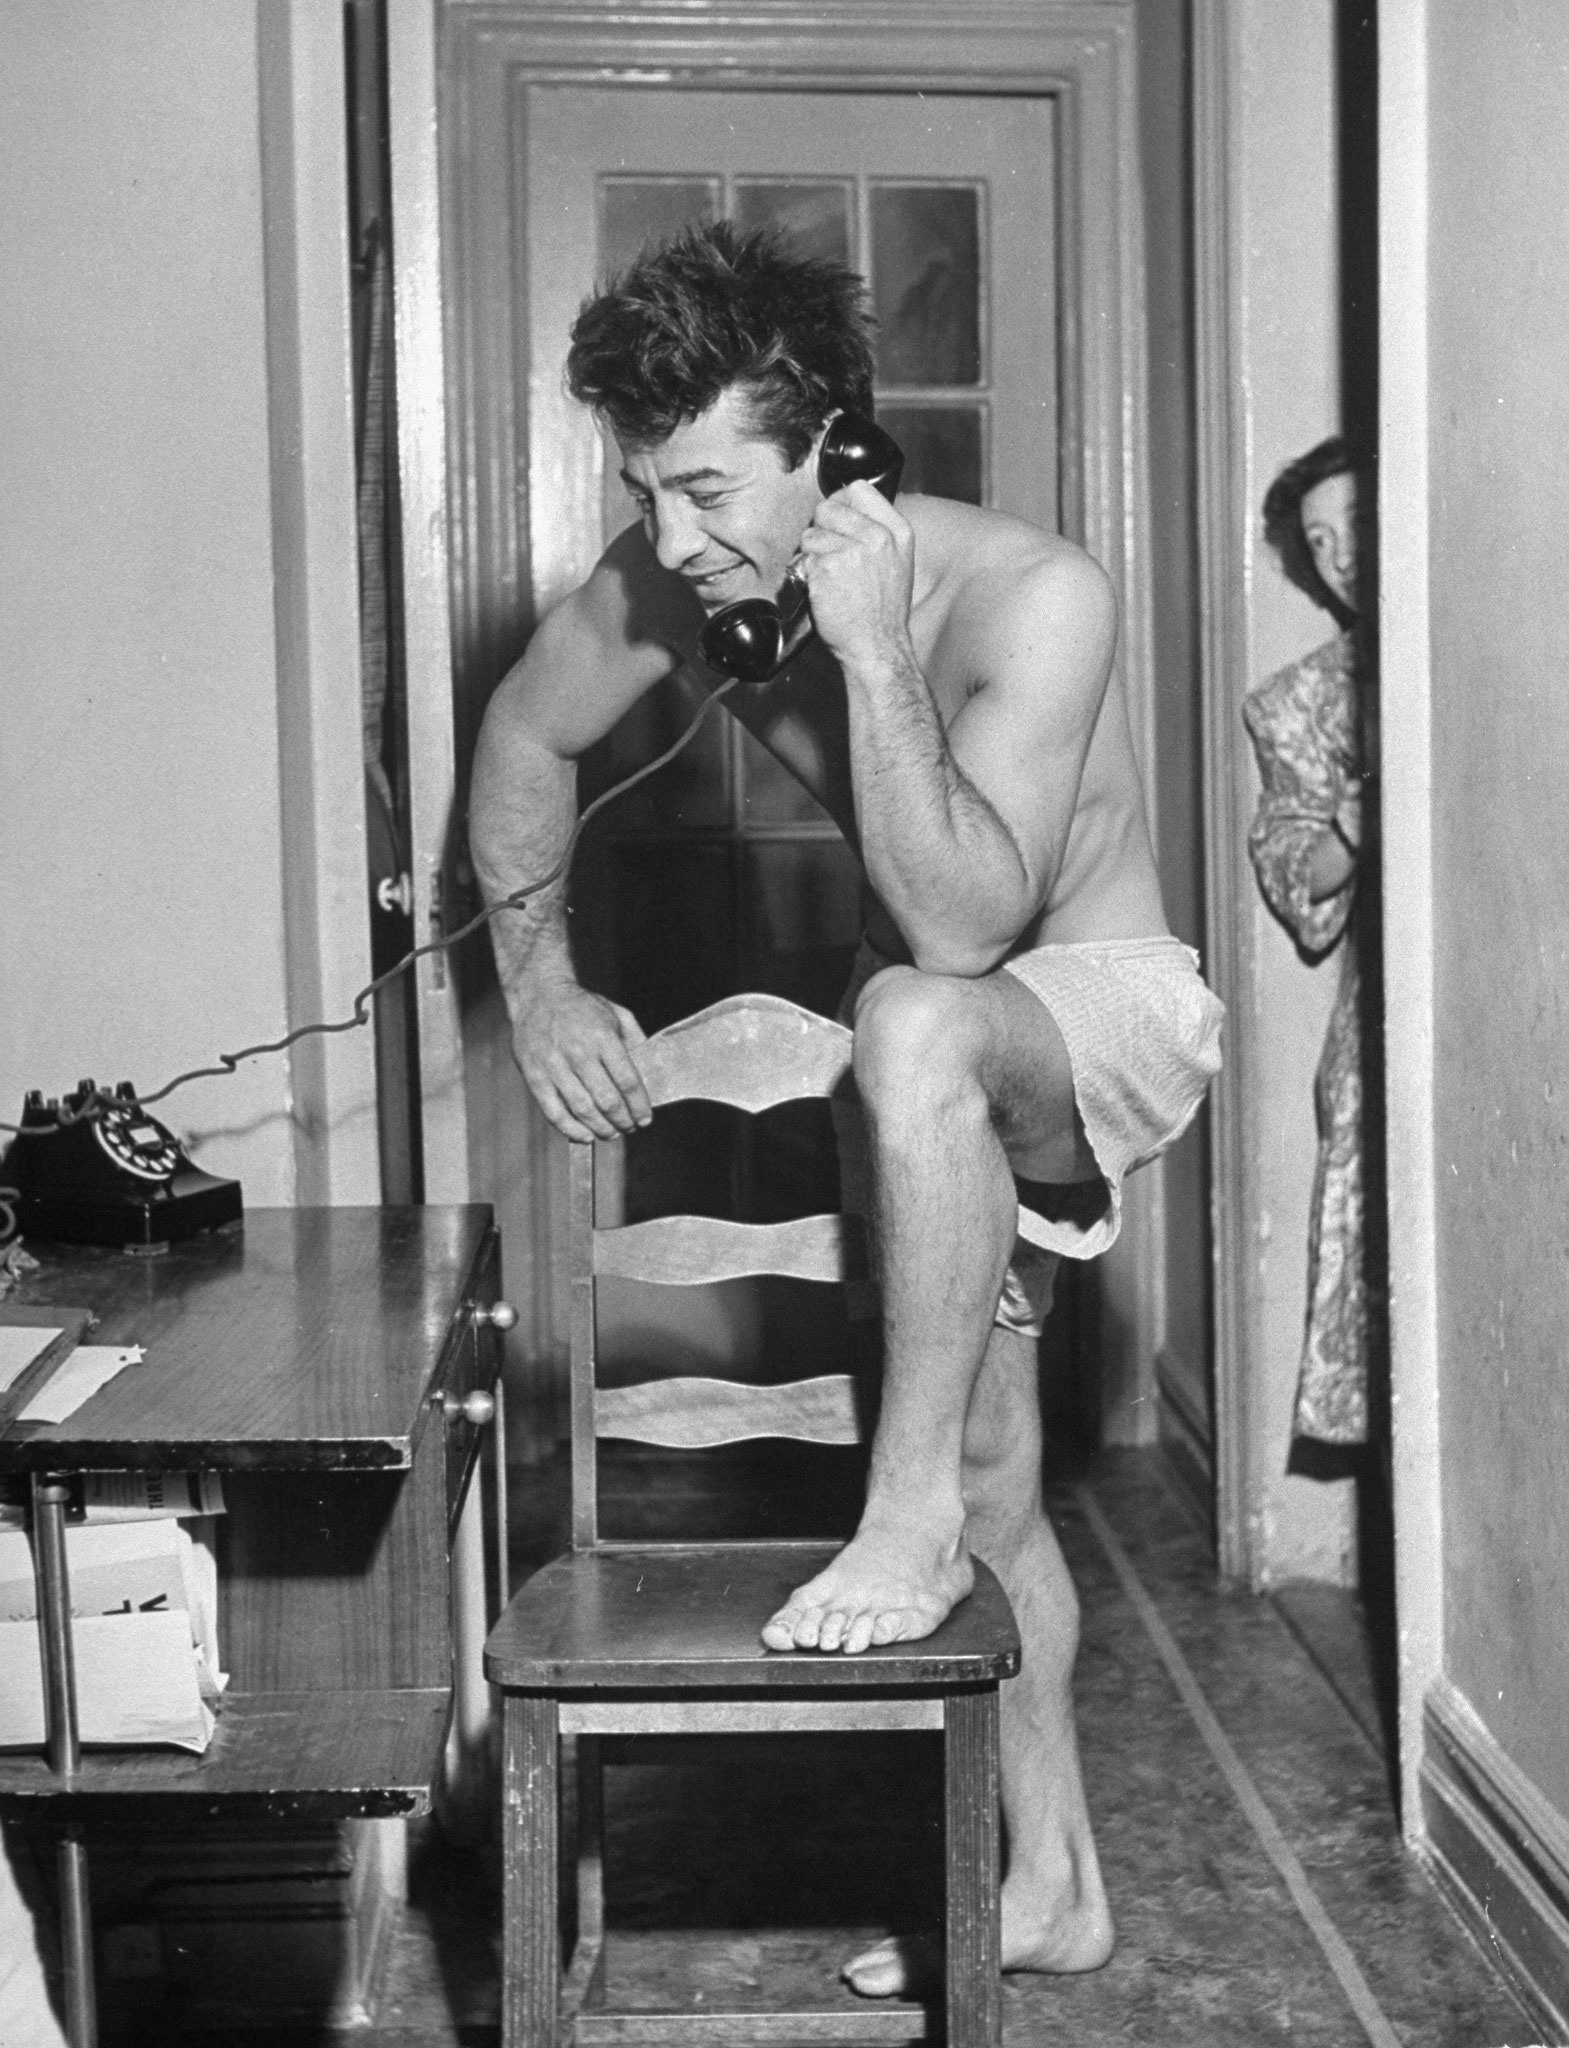 Rocky Graziano on the phone, 1947.